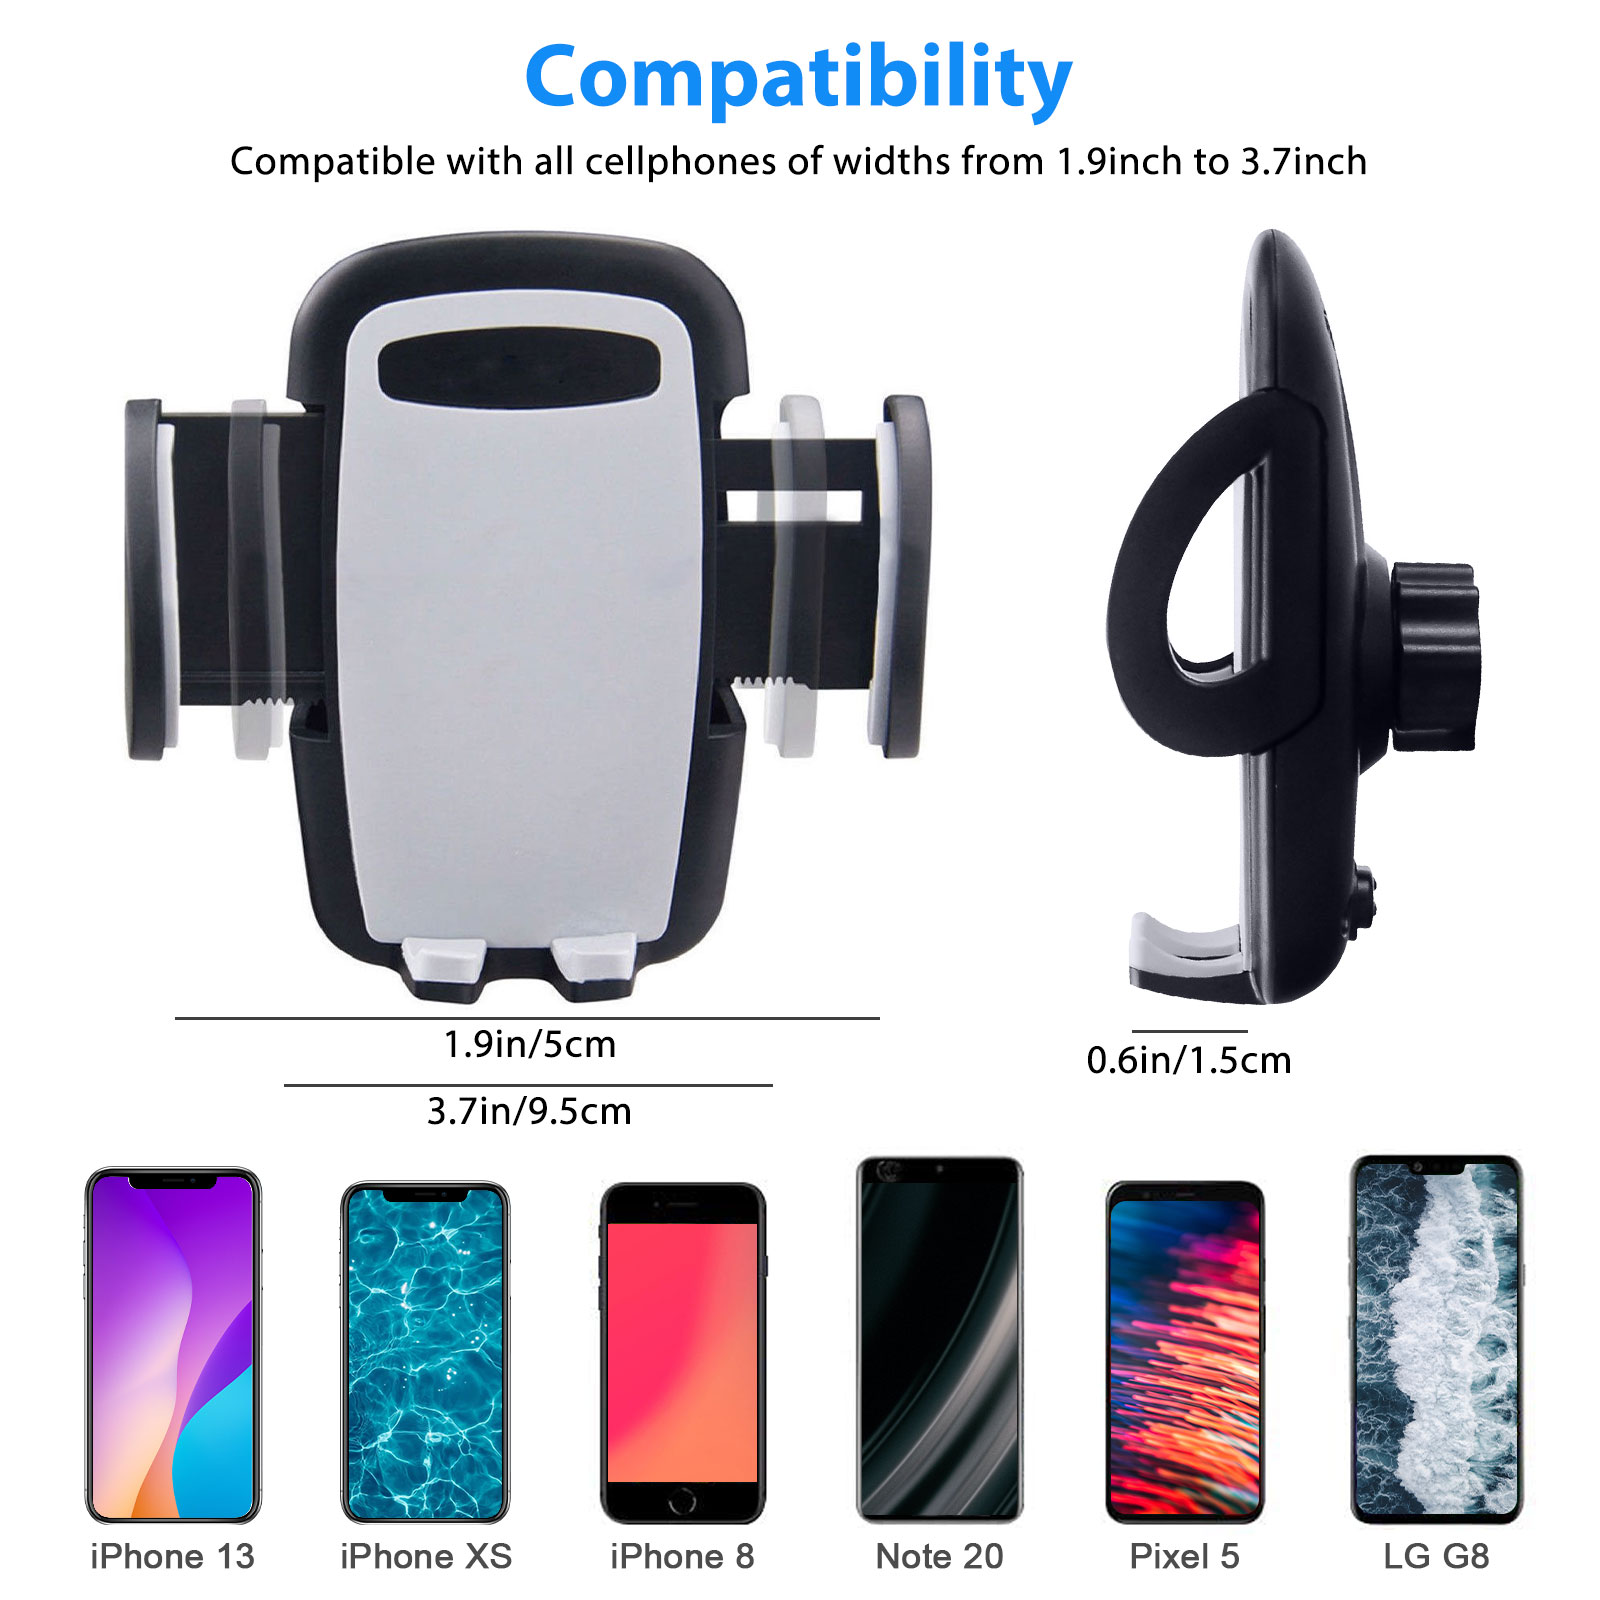 Car Mount, Air Vent Car Holder, Car Phone Mount Fit for iPhone 13, 12, 12 Pro, 12 Pro Max, 11 XS X 8, Android Cell Phones, Phone Holder for Car, Universal Air Vent Mount for Men Women - image 4 of 9